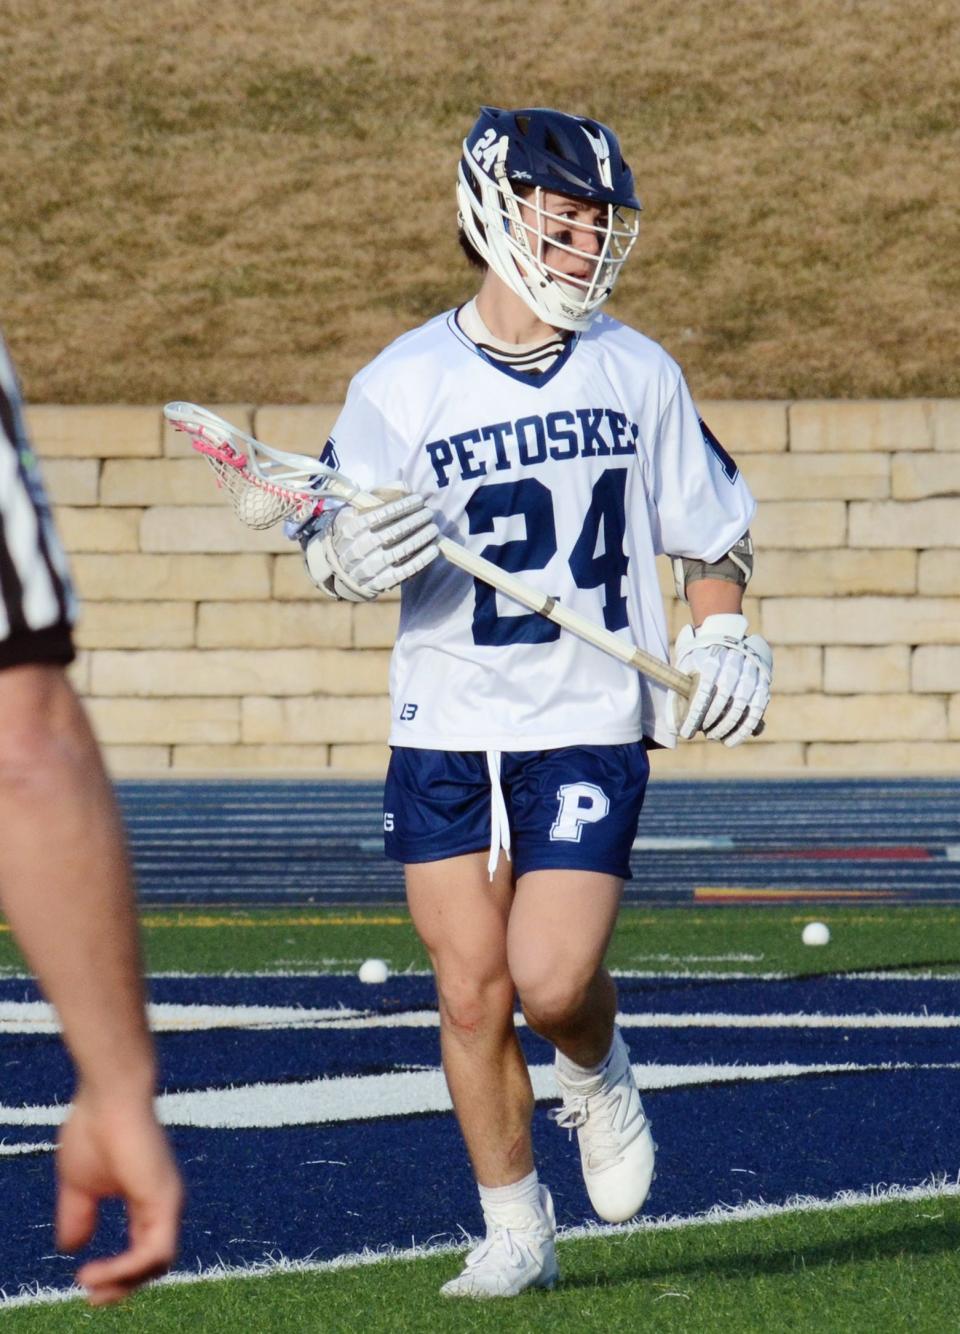 Charlie Thomas is off to a big start for the Petoskey lacrosse team, with 12 goals over the weekend to his credit.